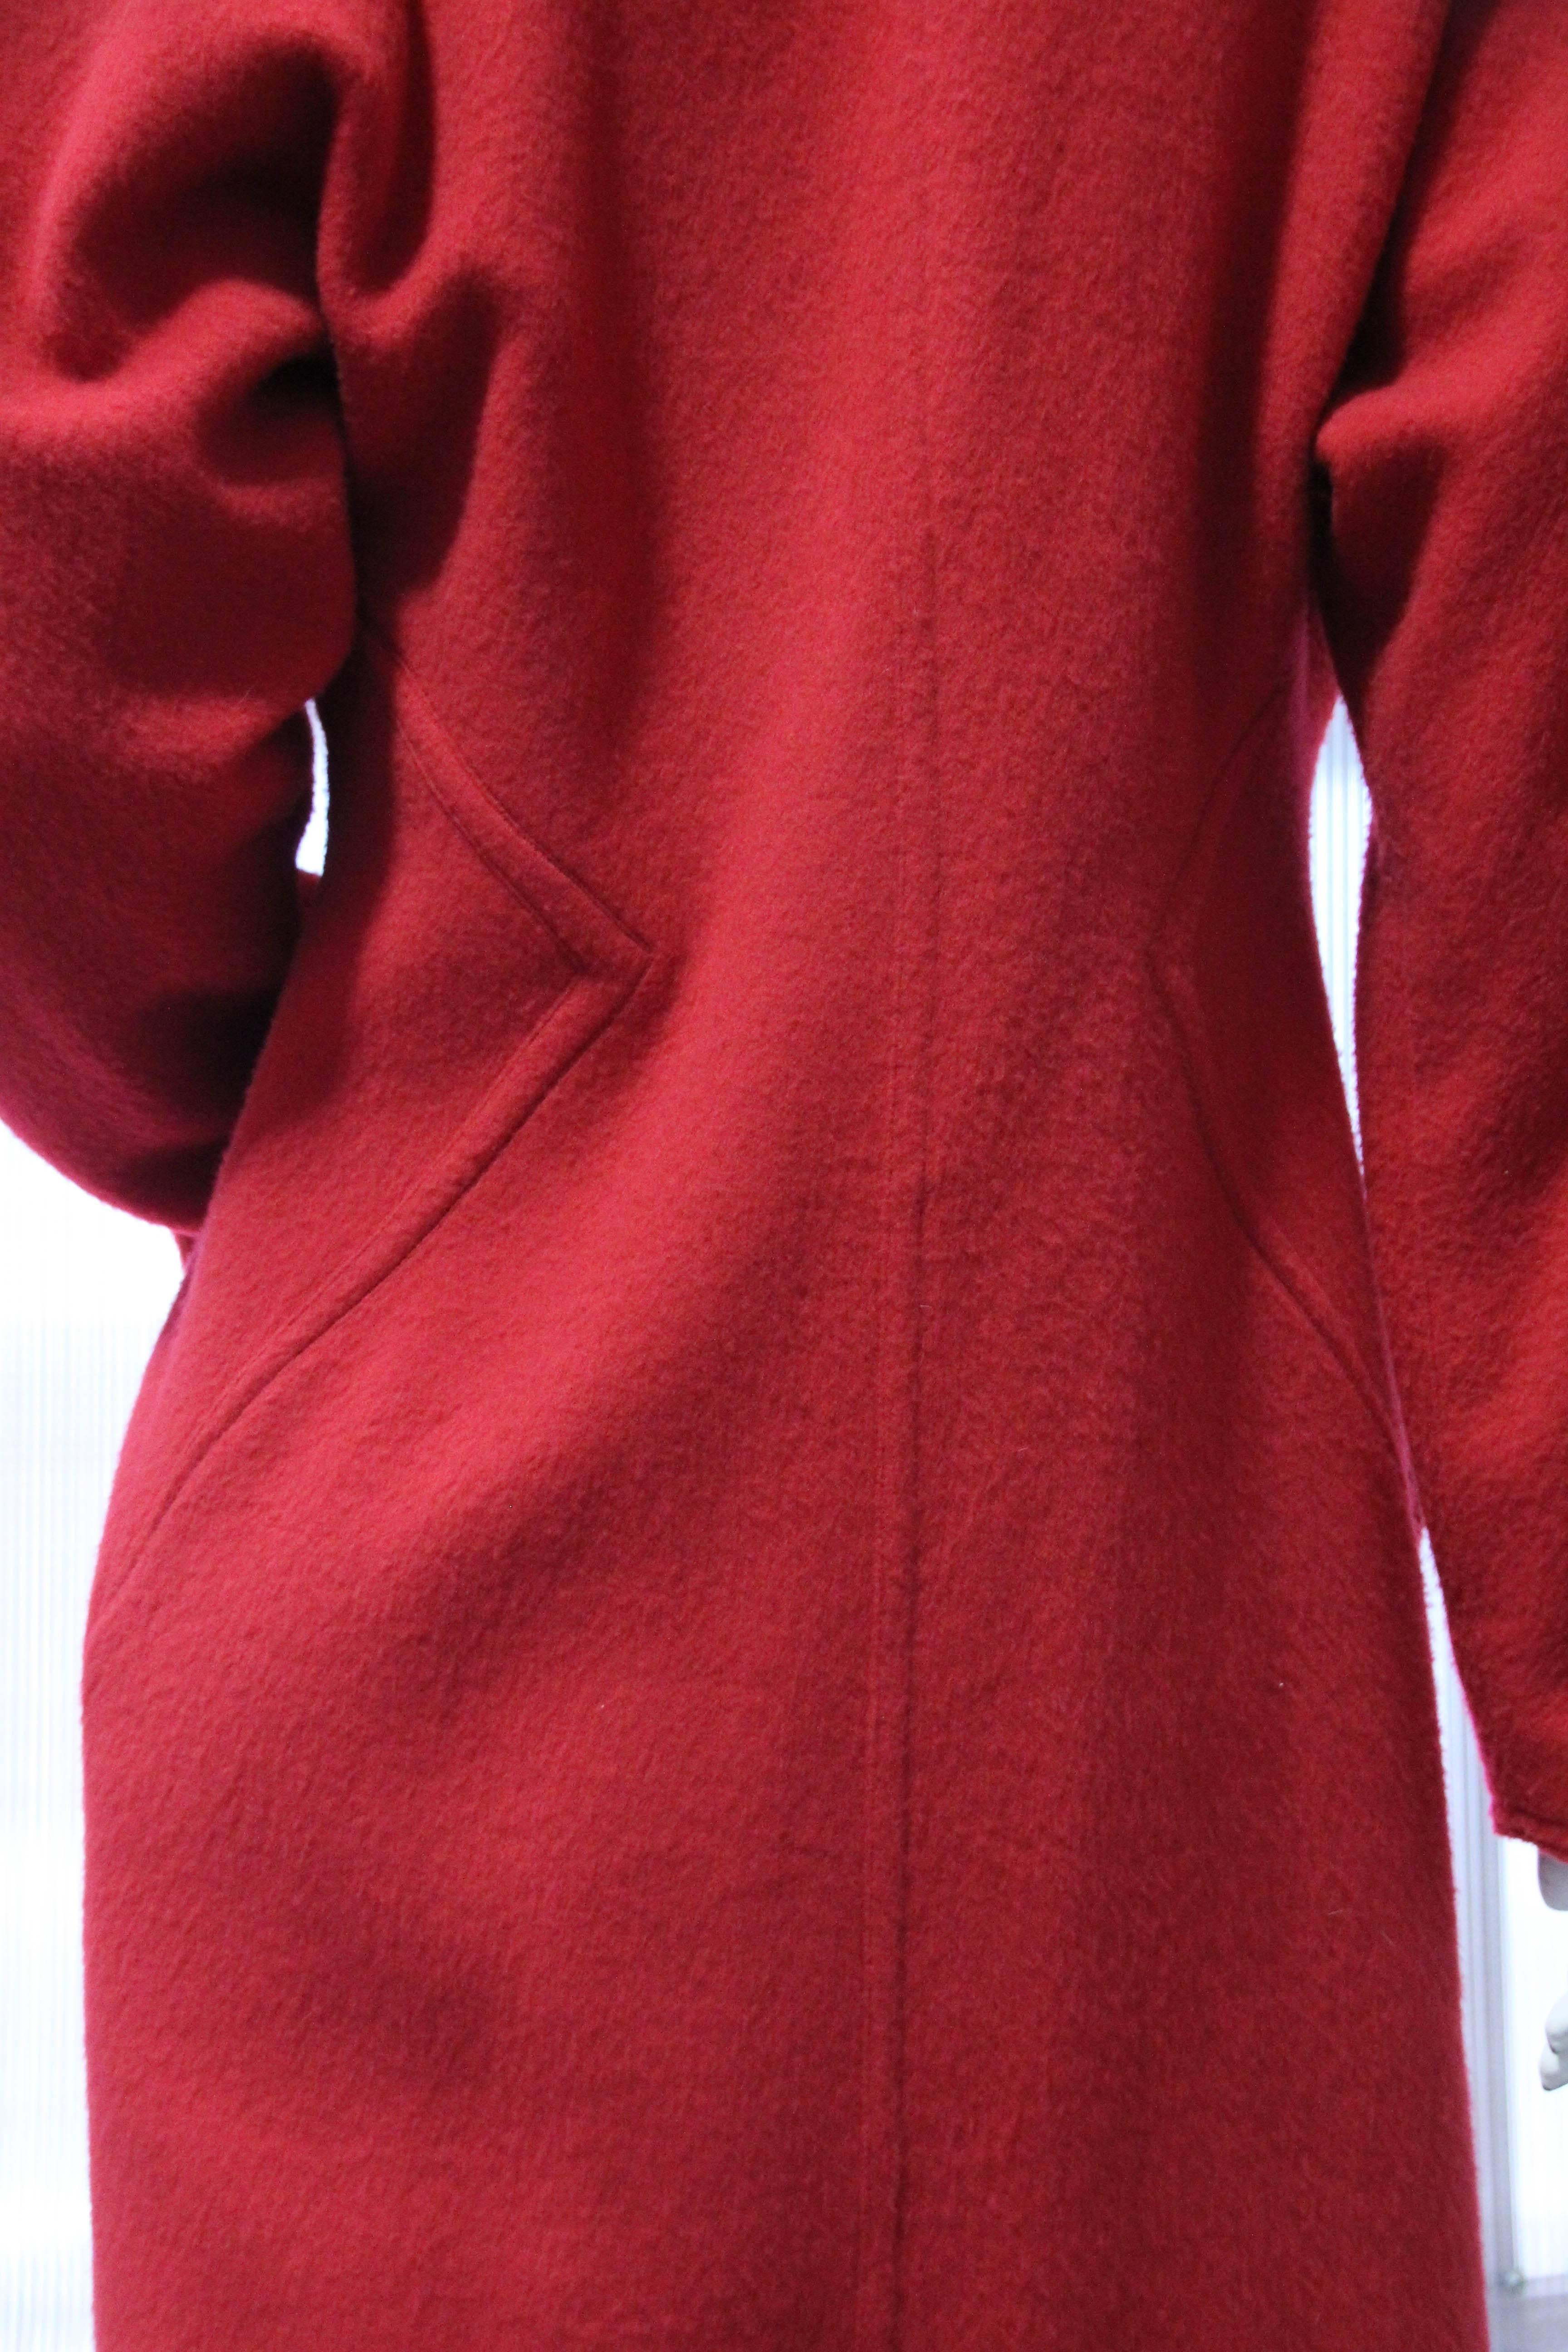 1980s Gianni Versace Primary Red Wool Coat w Angular Trapunto Stitching Details For Sale 1